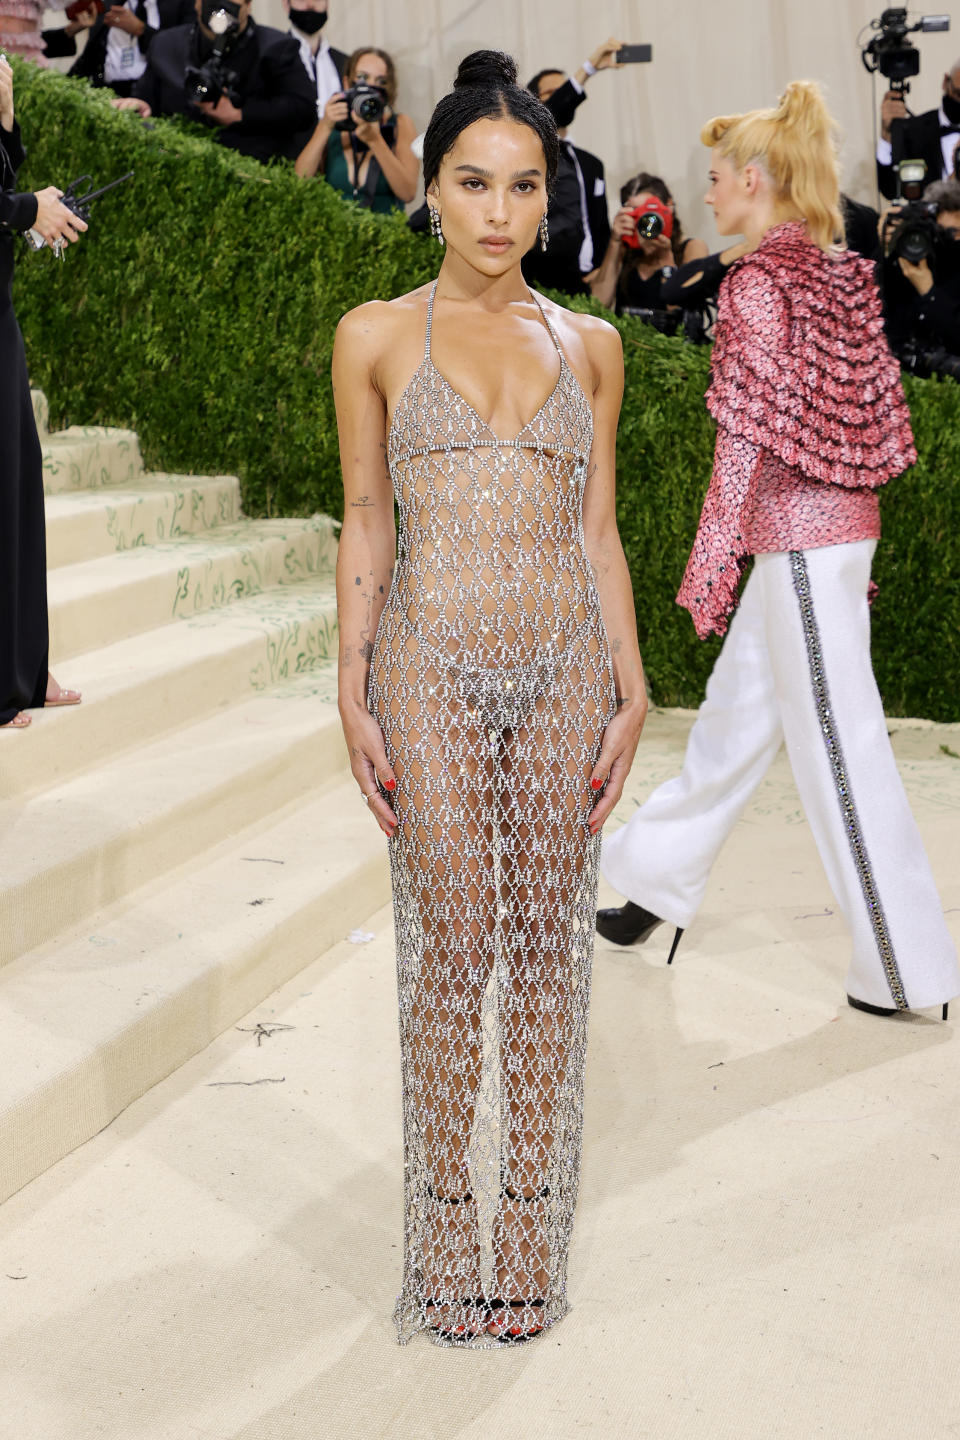 Zoe Kravitz attends The 2021 Met Gala Celebrating In America: A Lexicon Of Fashion at Metropolitan Museum of Art on September 13, 2021 in New York City. (Getty Images)